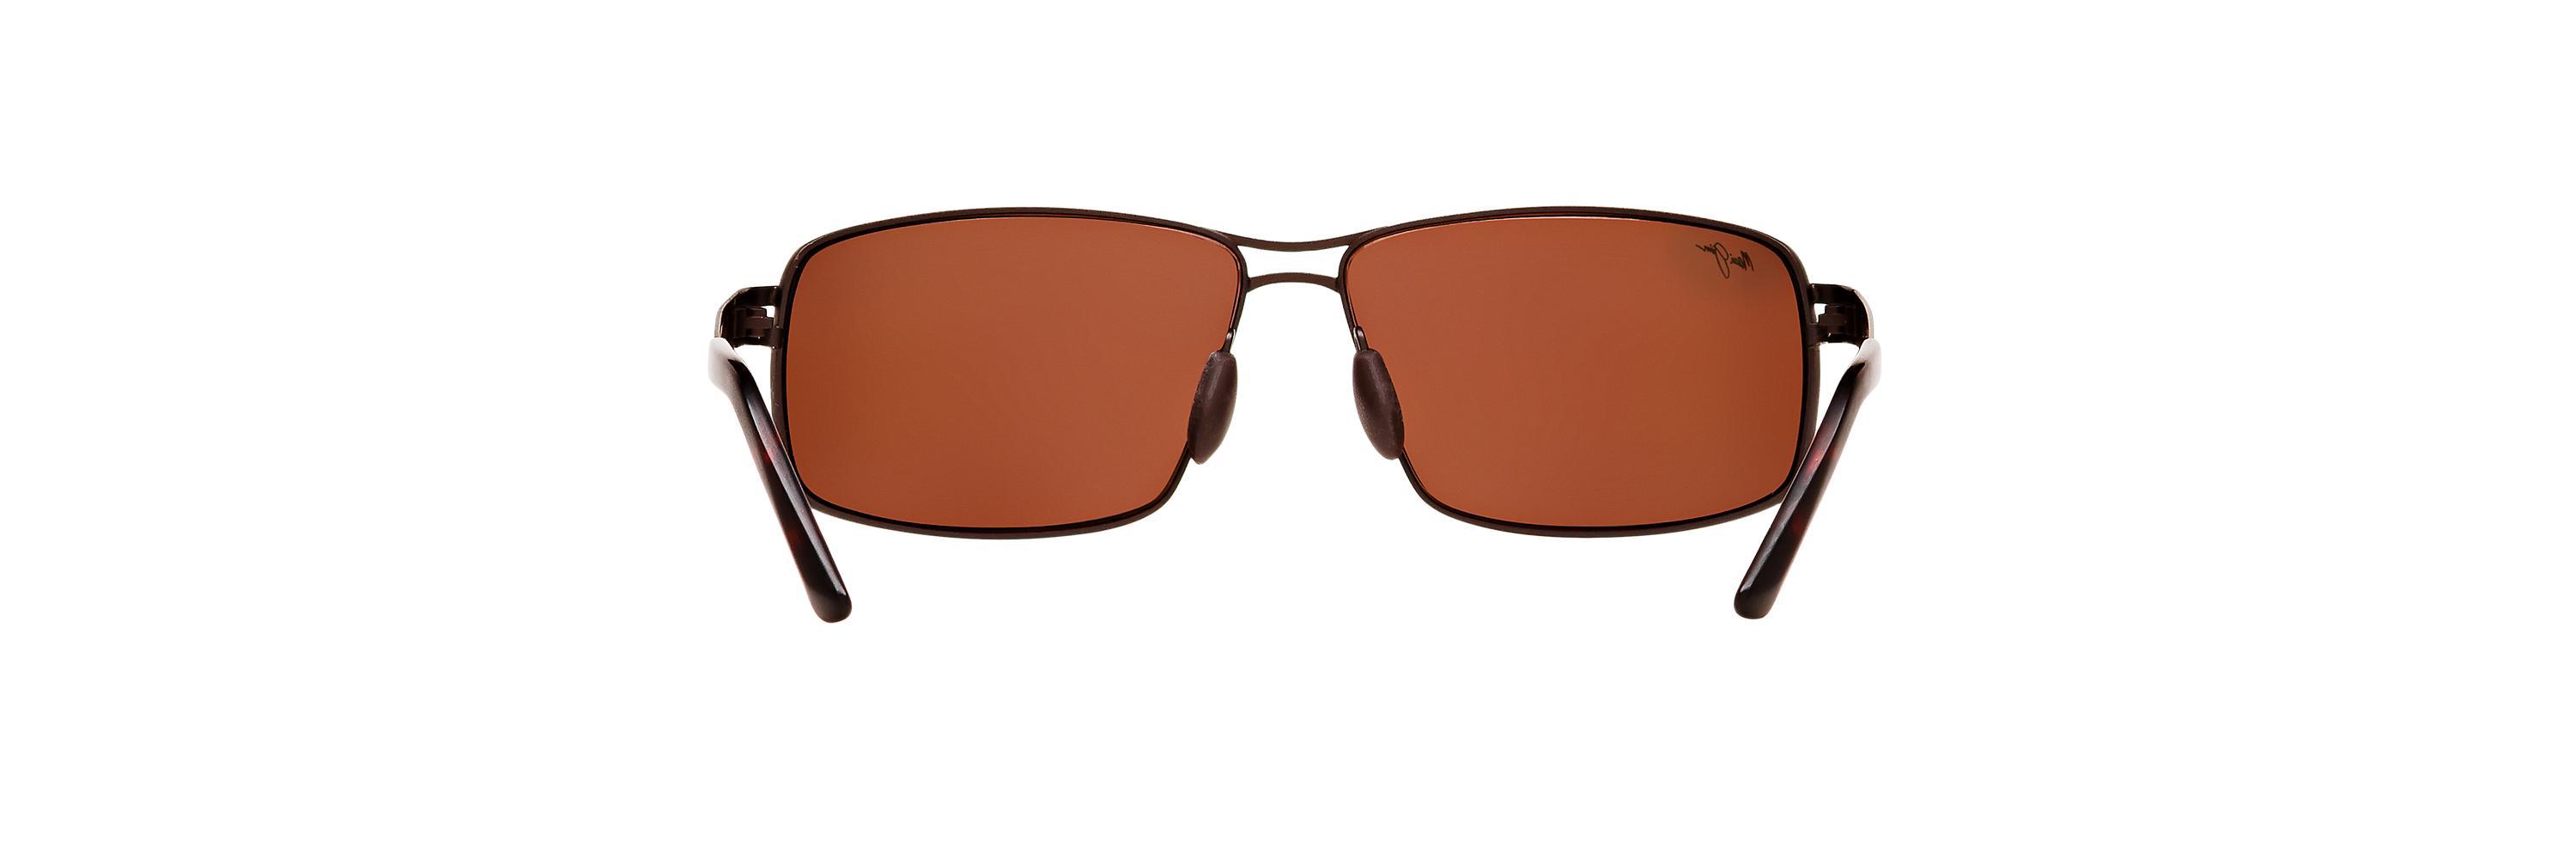 Maui Jim 276 Manu Only At Sunglass Hut in Brown / Bronze (Brown) for